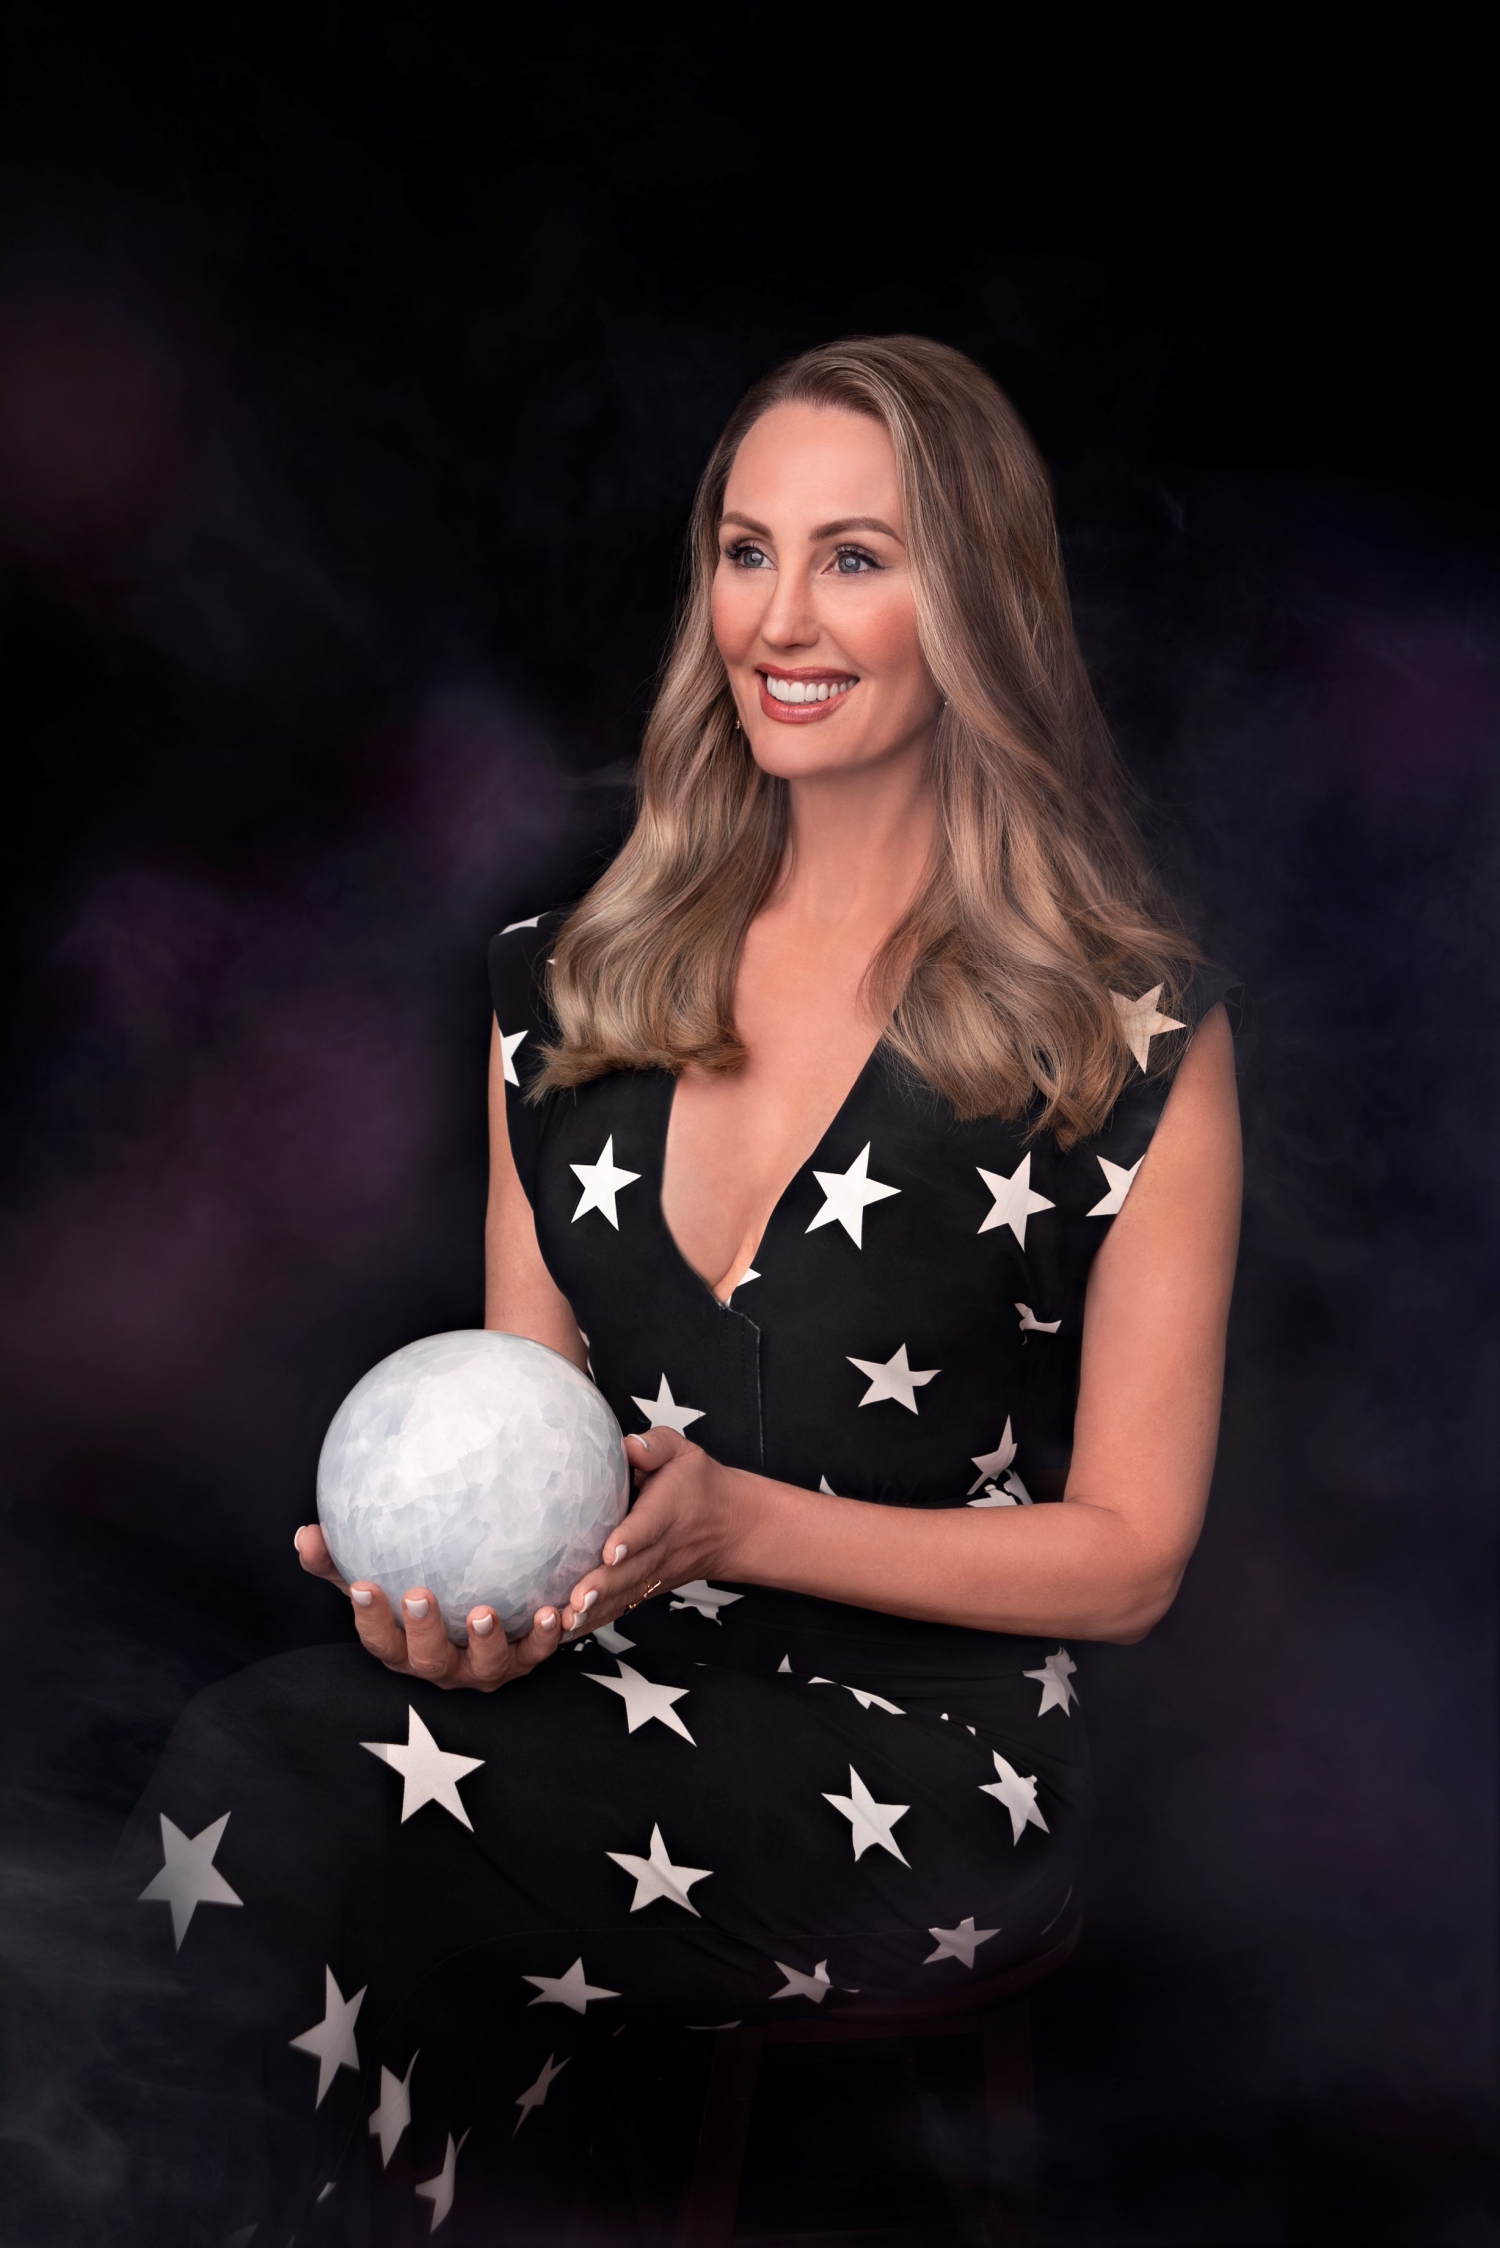 Prosecco and the Stars' an evening of prosecco, food with an appearance by Natasha Weber Australia' leading media astrologer